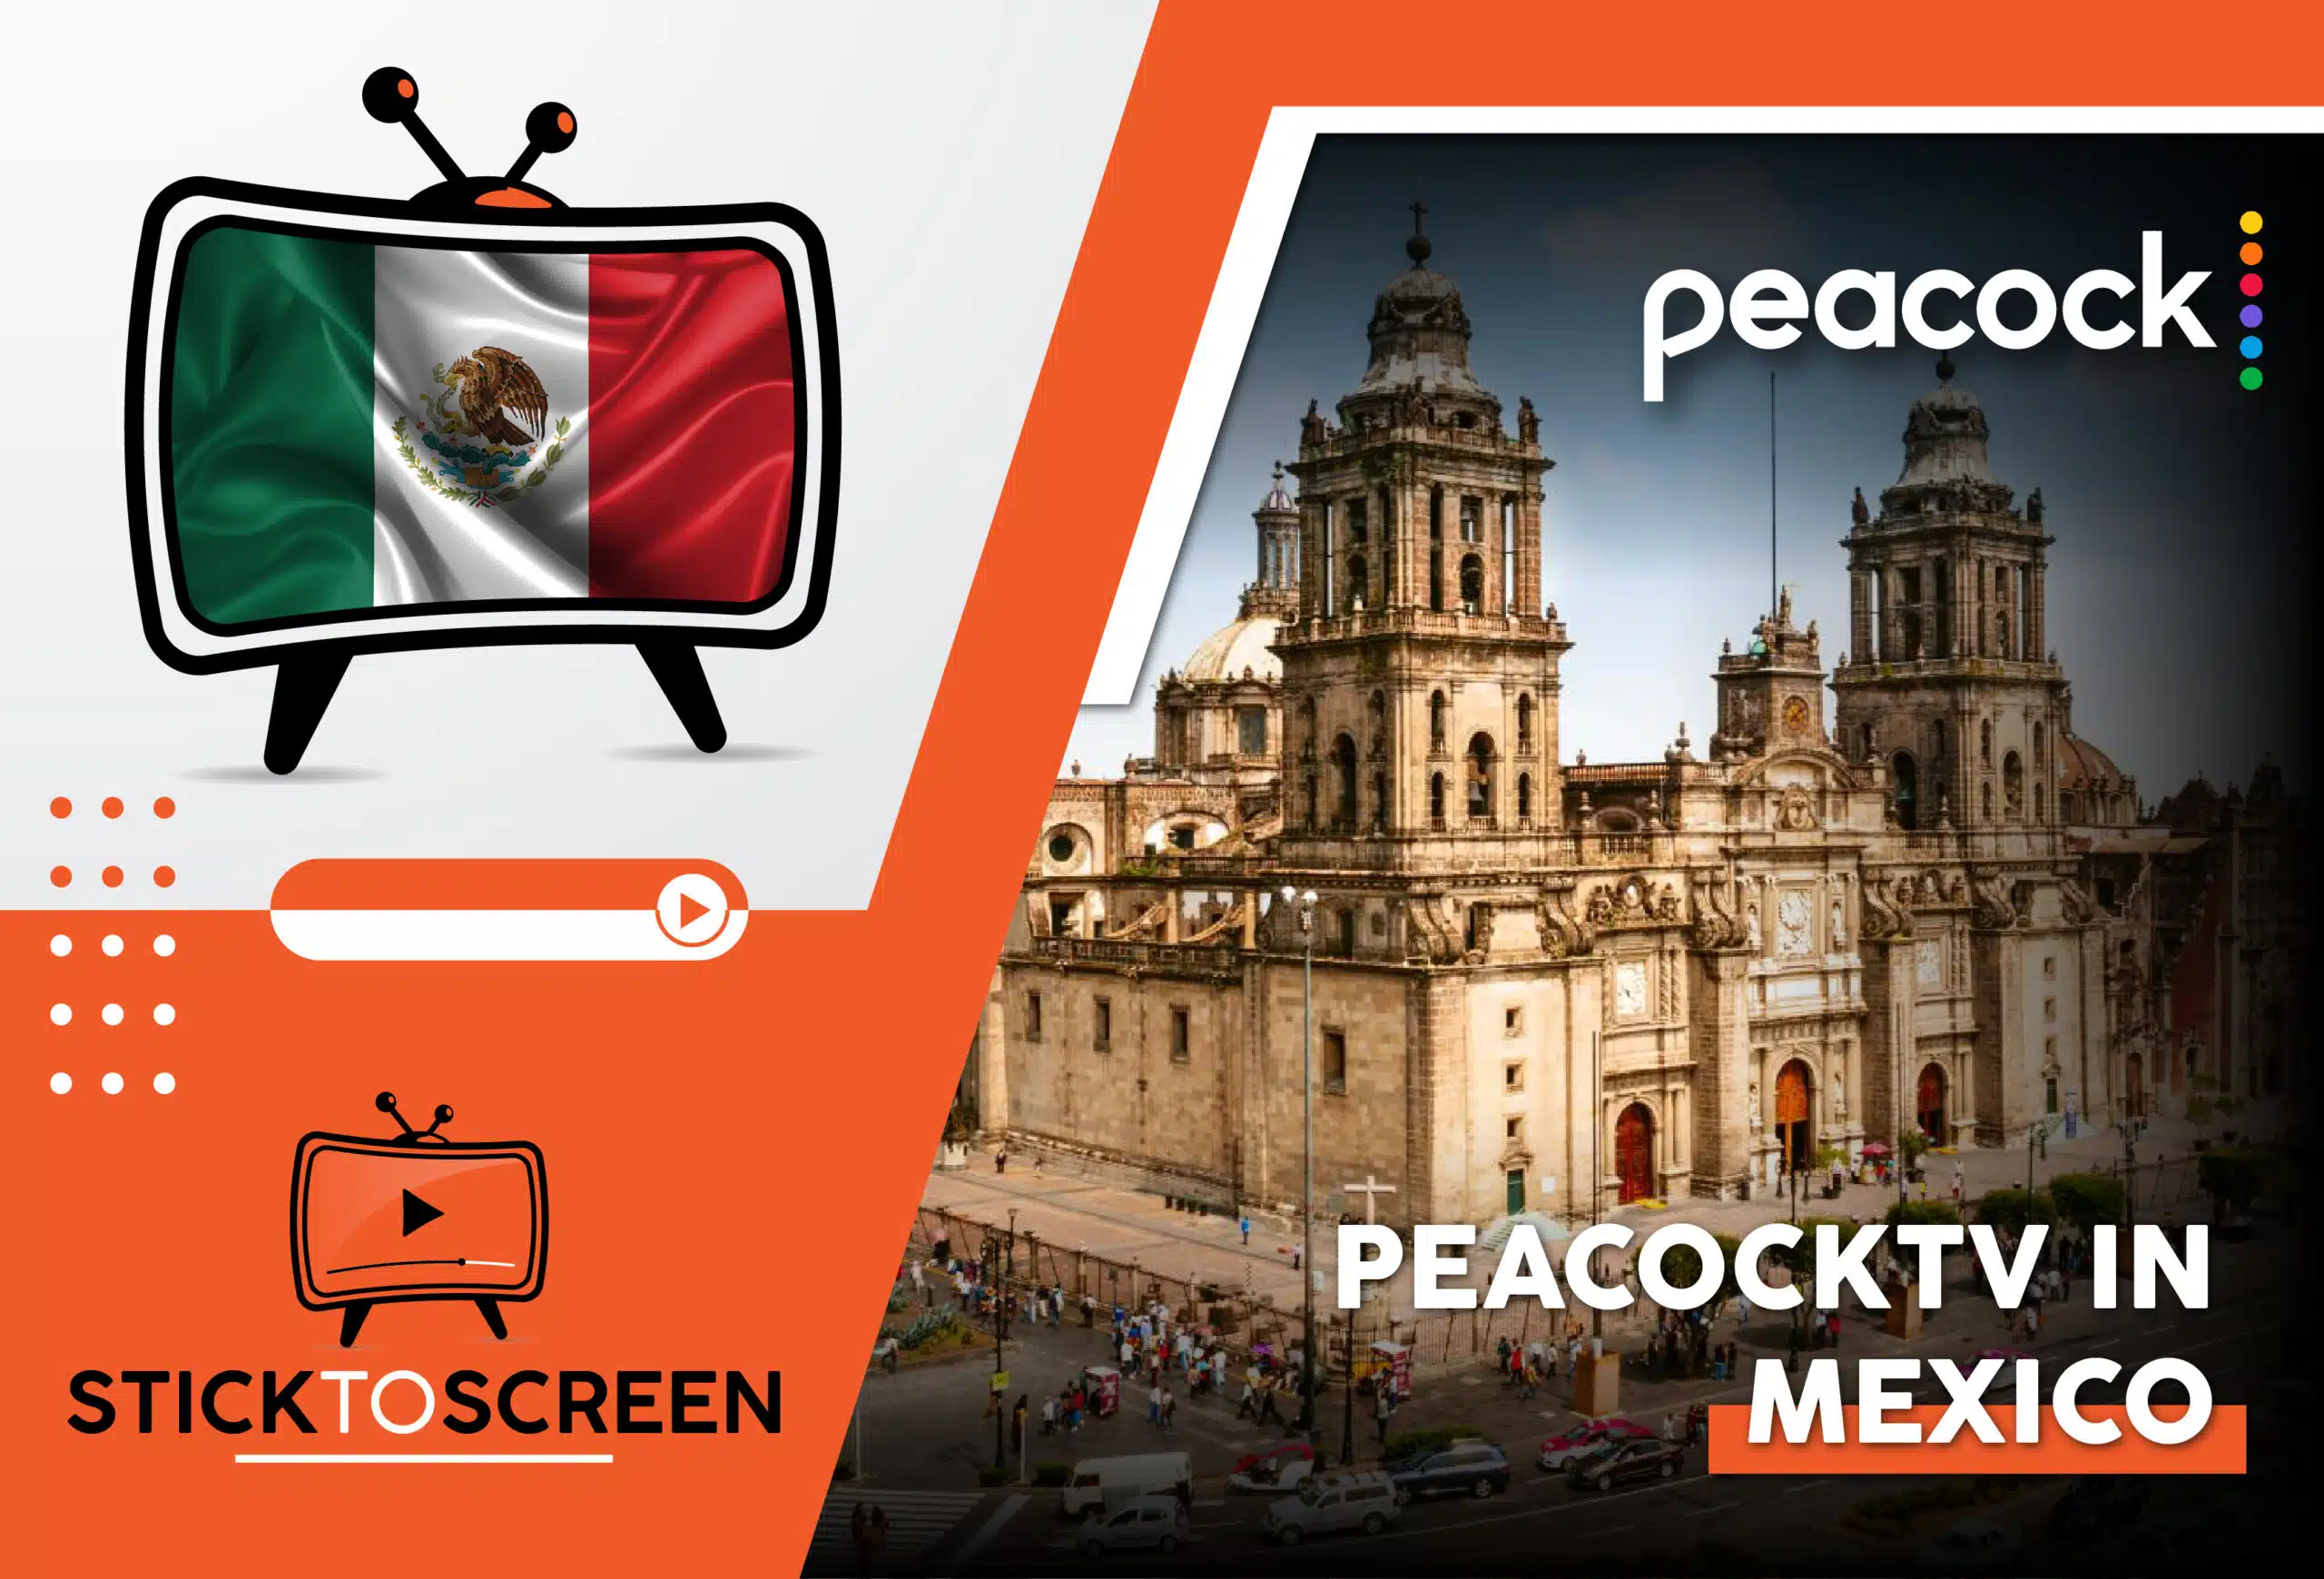 Watch Peacock TV in Mexico